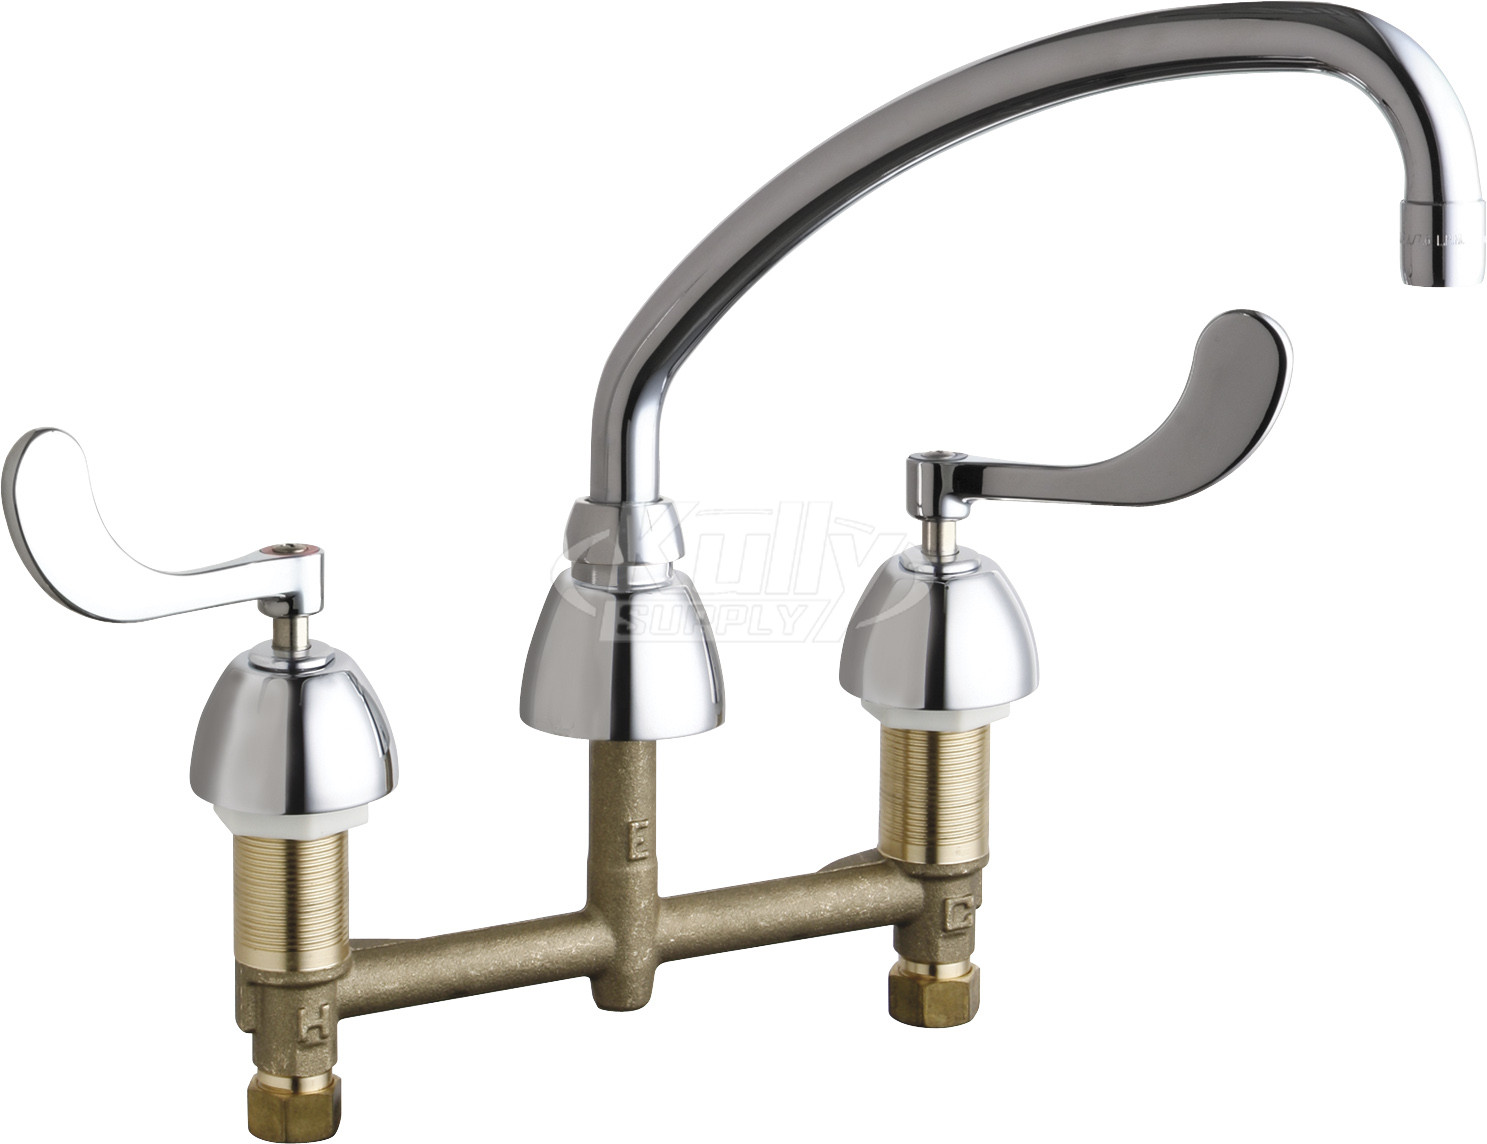 Chicago 201-A317ABCP Concealed Hot and Cold Water Sink Faucet